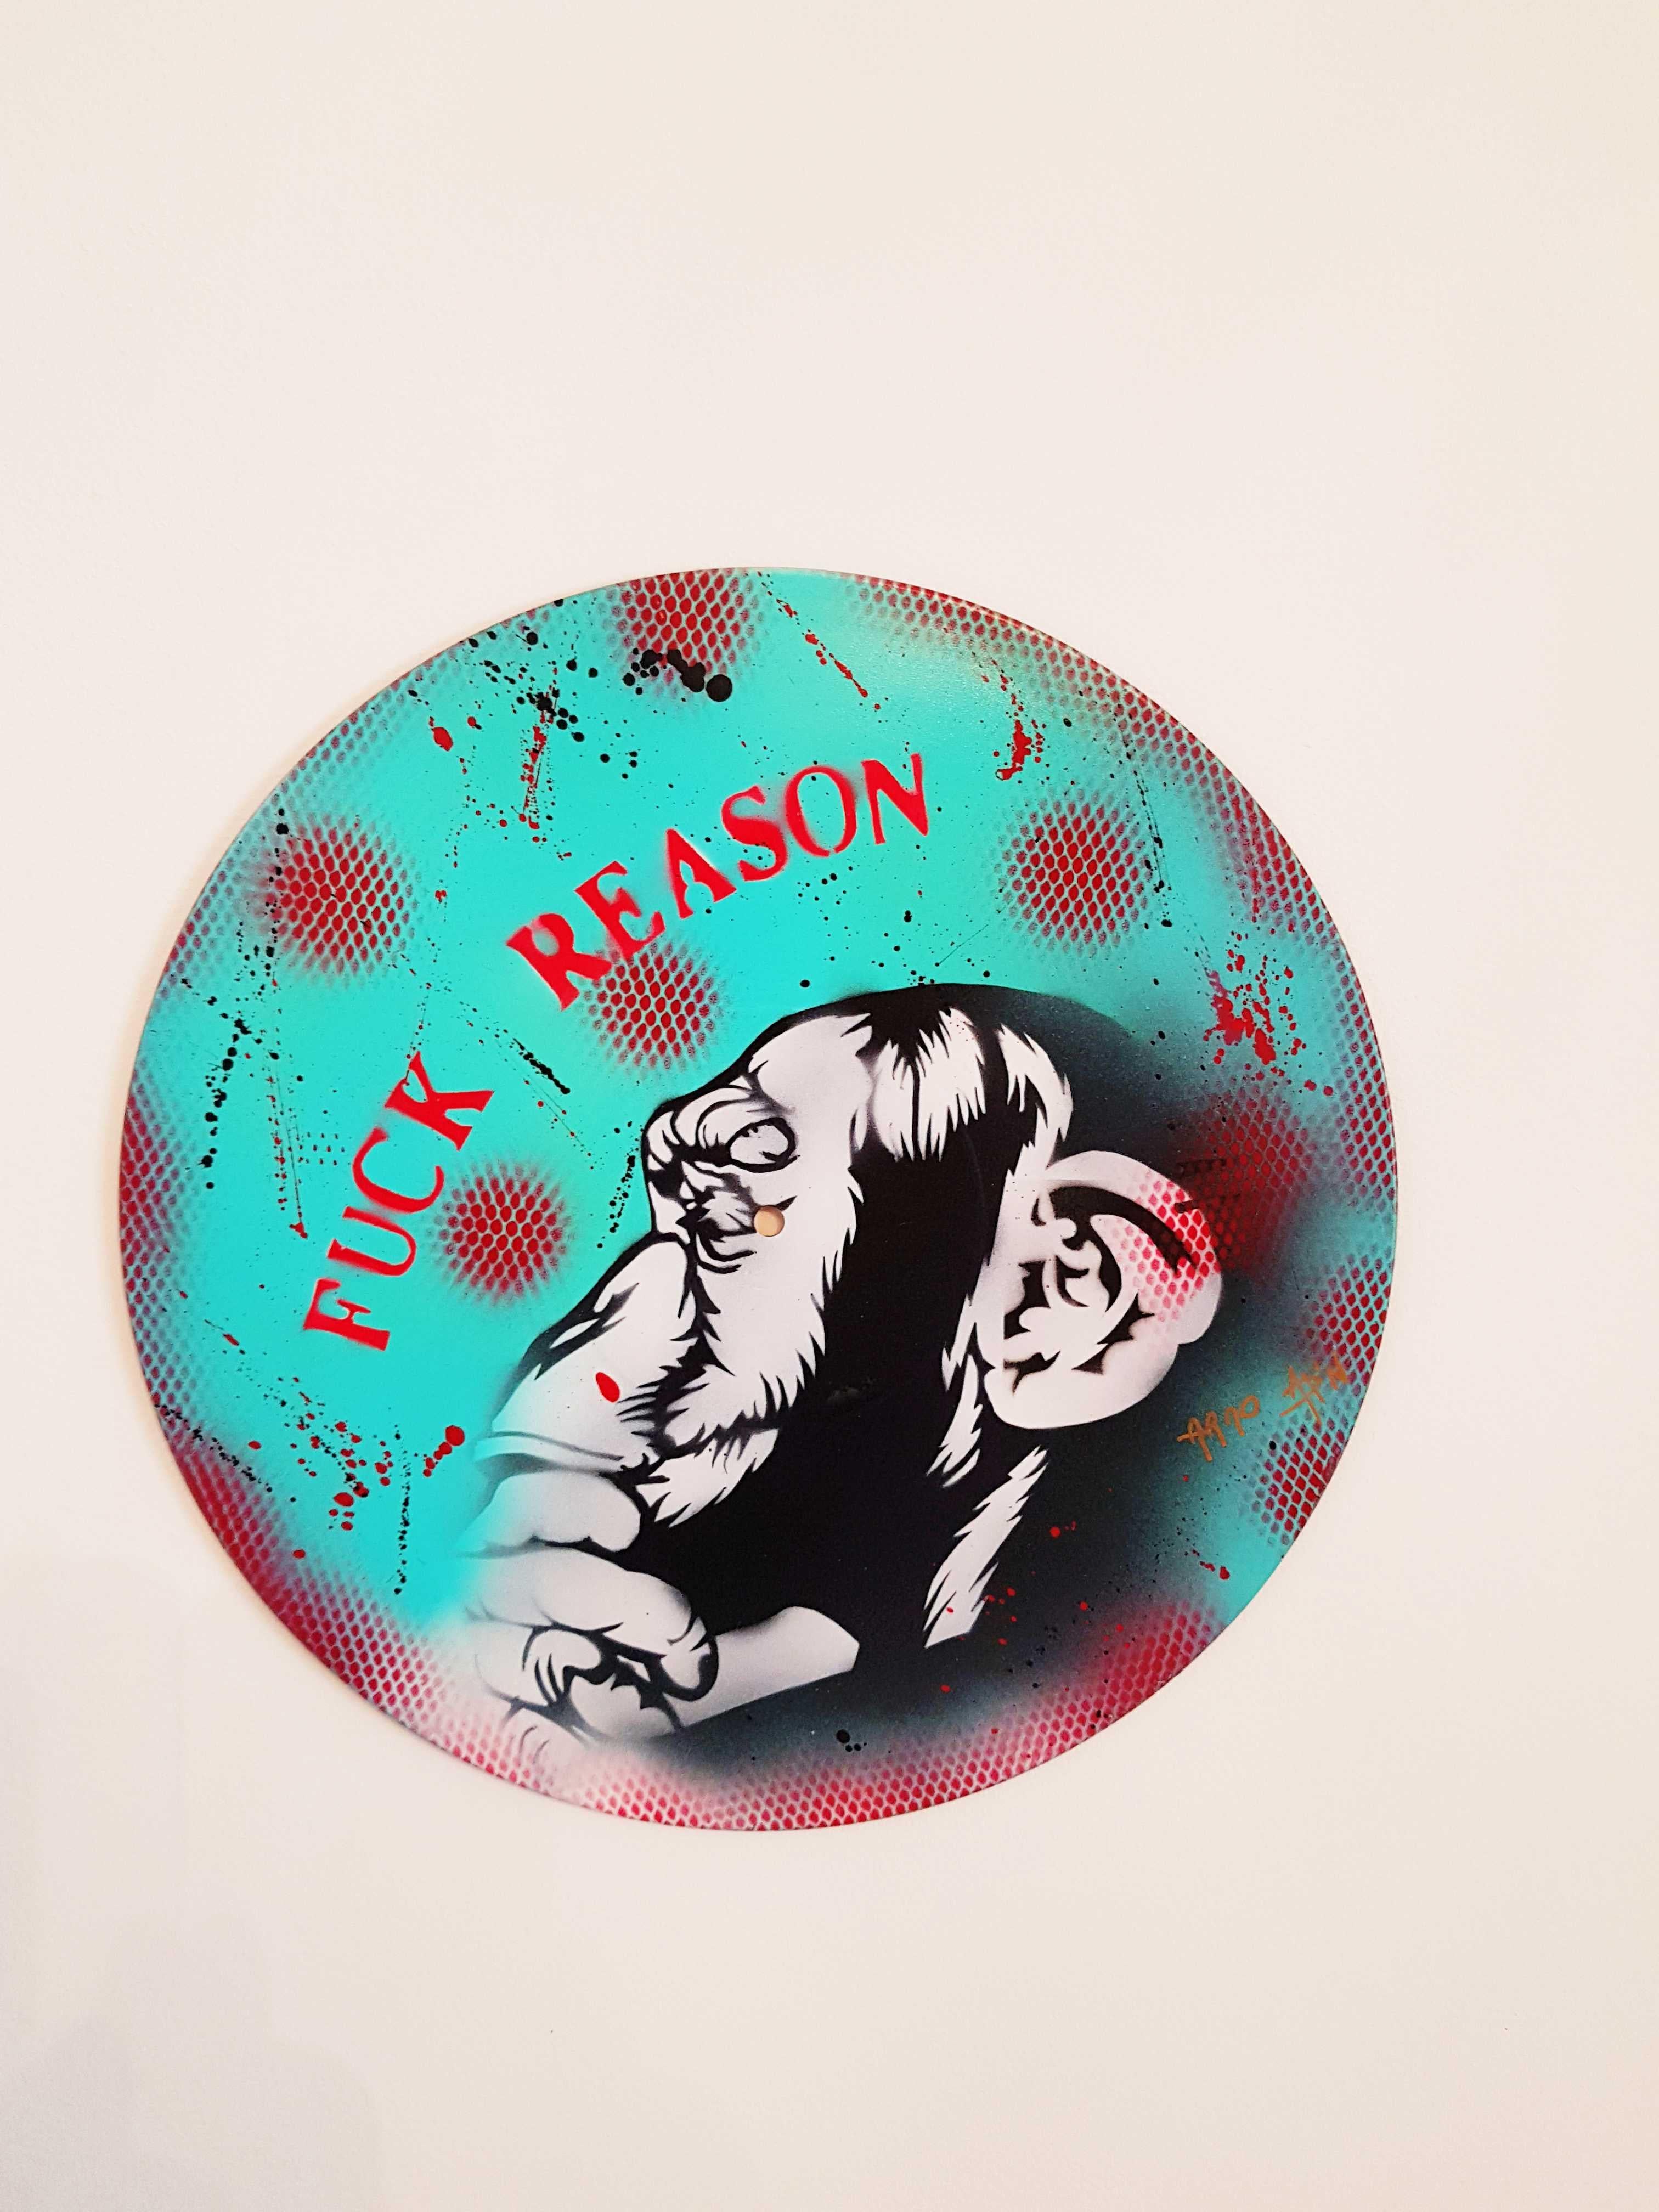 Fuck reason - Painting by Arno DNA